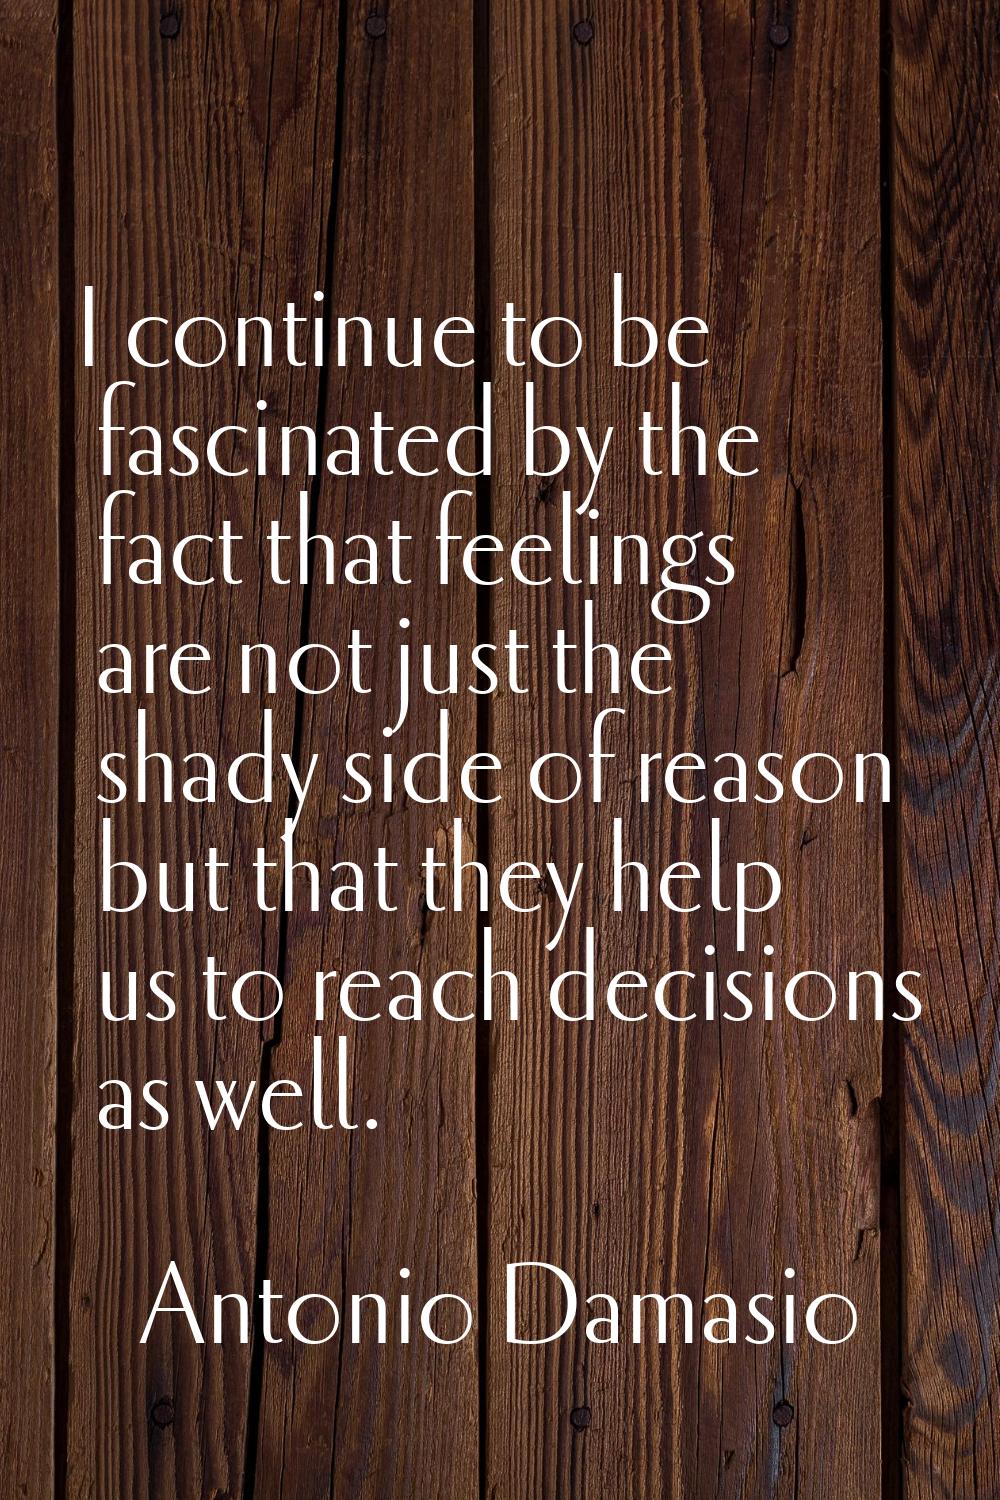 I continue to be fascinated by the fact that feelings are not just the shady side of reason but tha